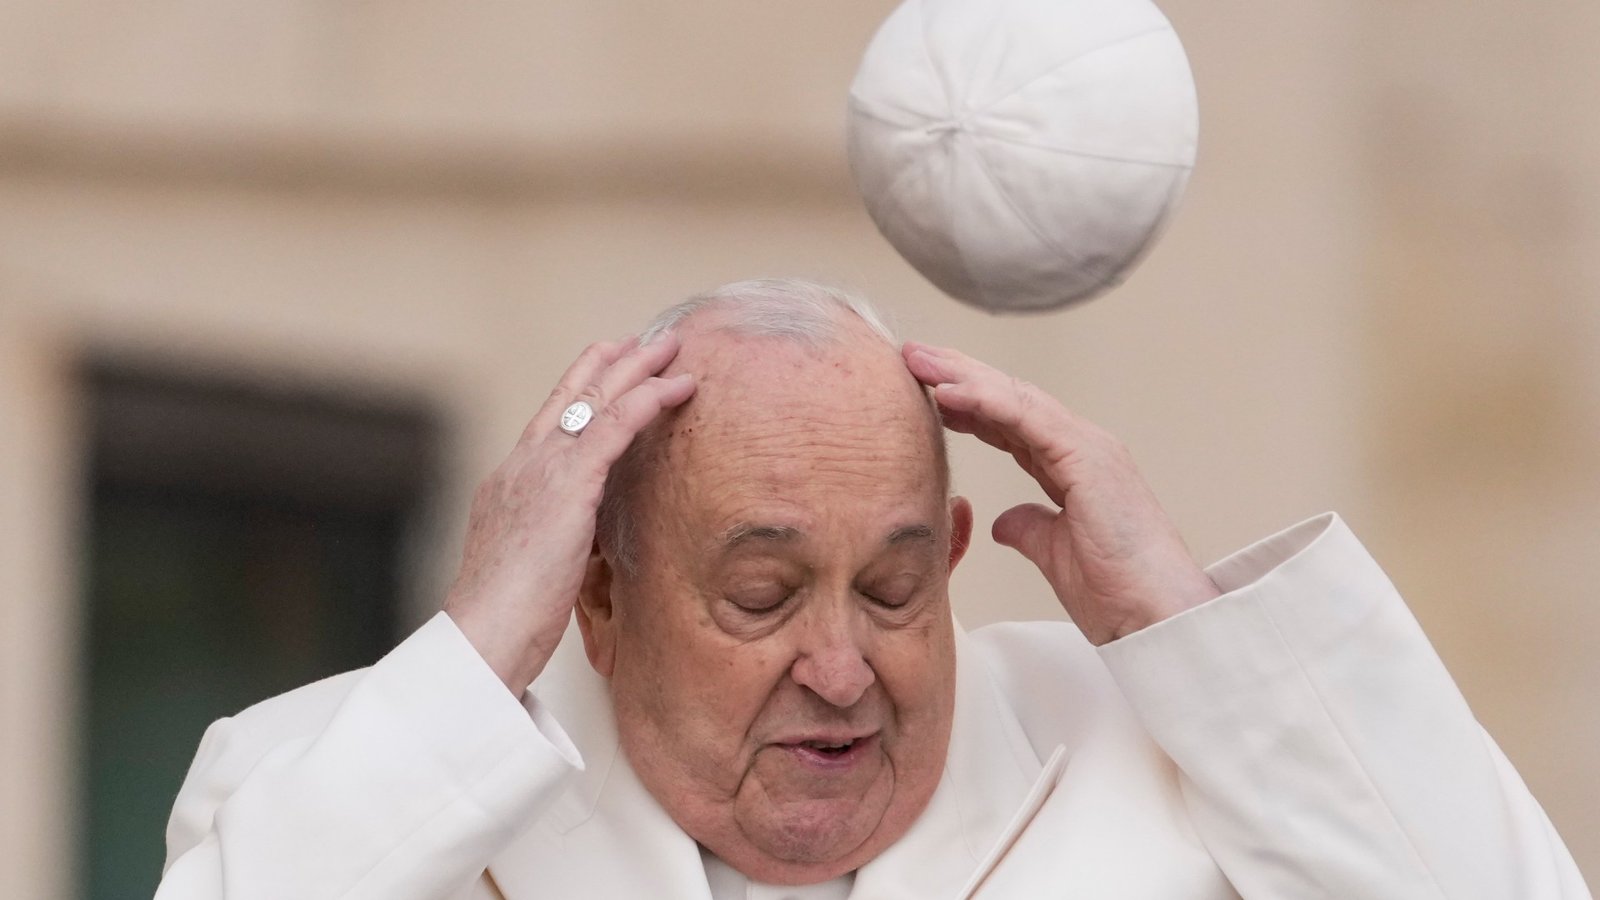 Moment Pope Francis’ hat sent flying in gust of wind